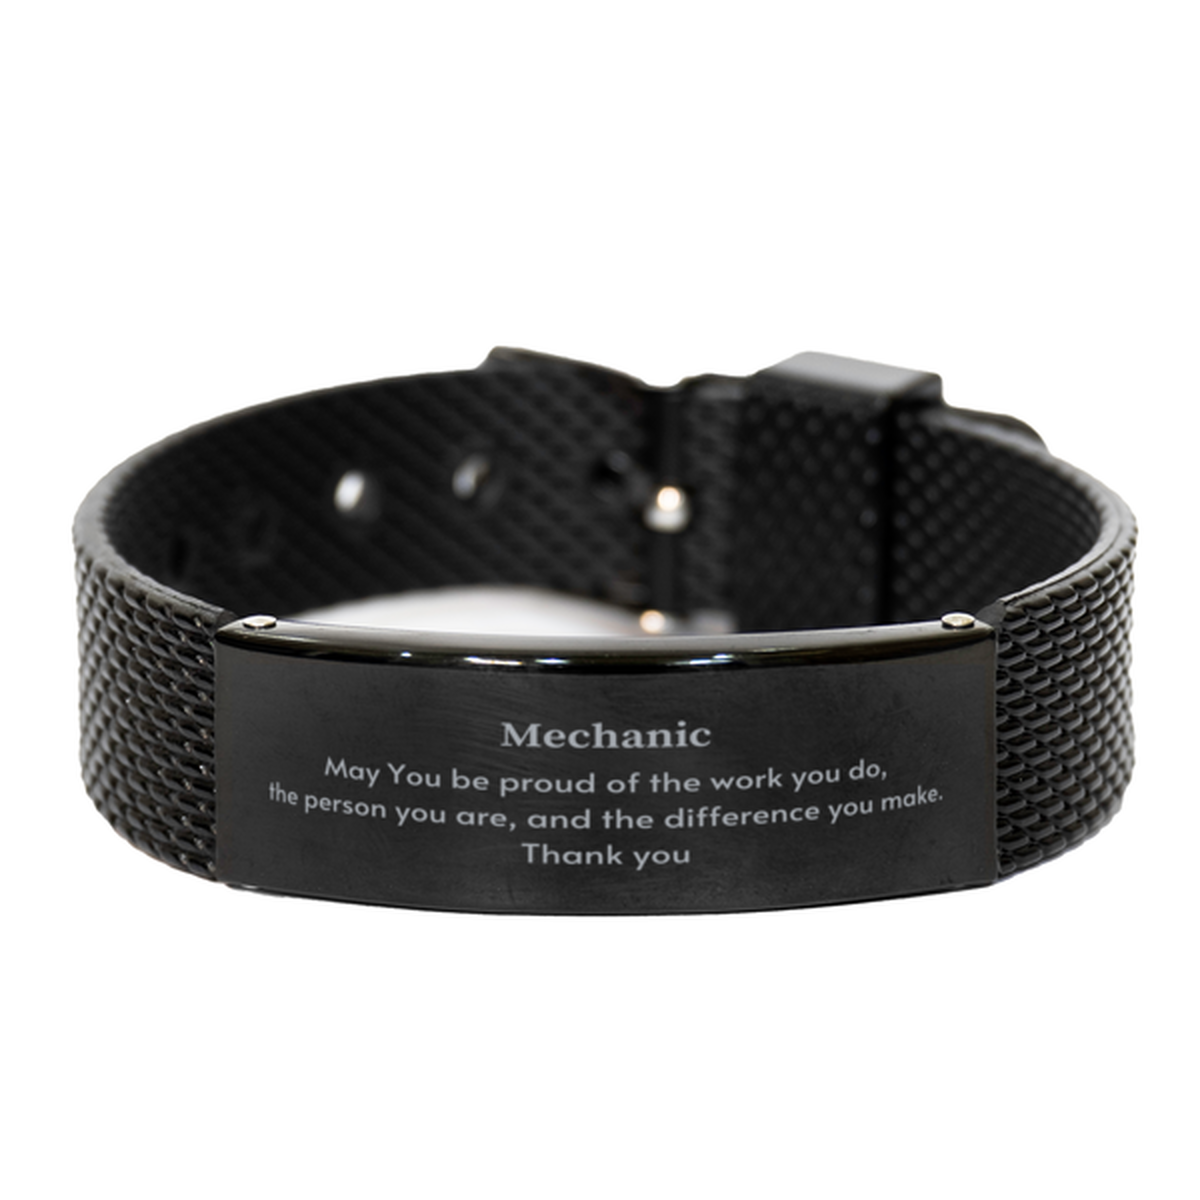 Heartwarming Black Shark Mesh Bracelet Retirement Coworkers Gifts for Mechanic, Mechanic May You be proud of the work you do, the person you are Gifts for Boss Men Women Friends